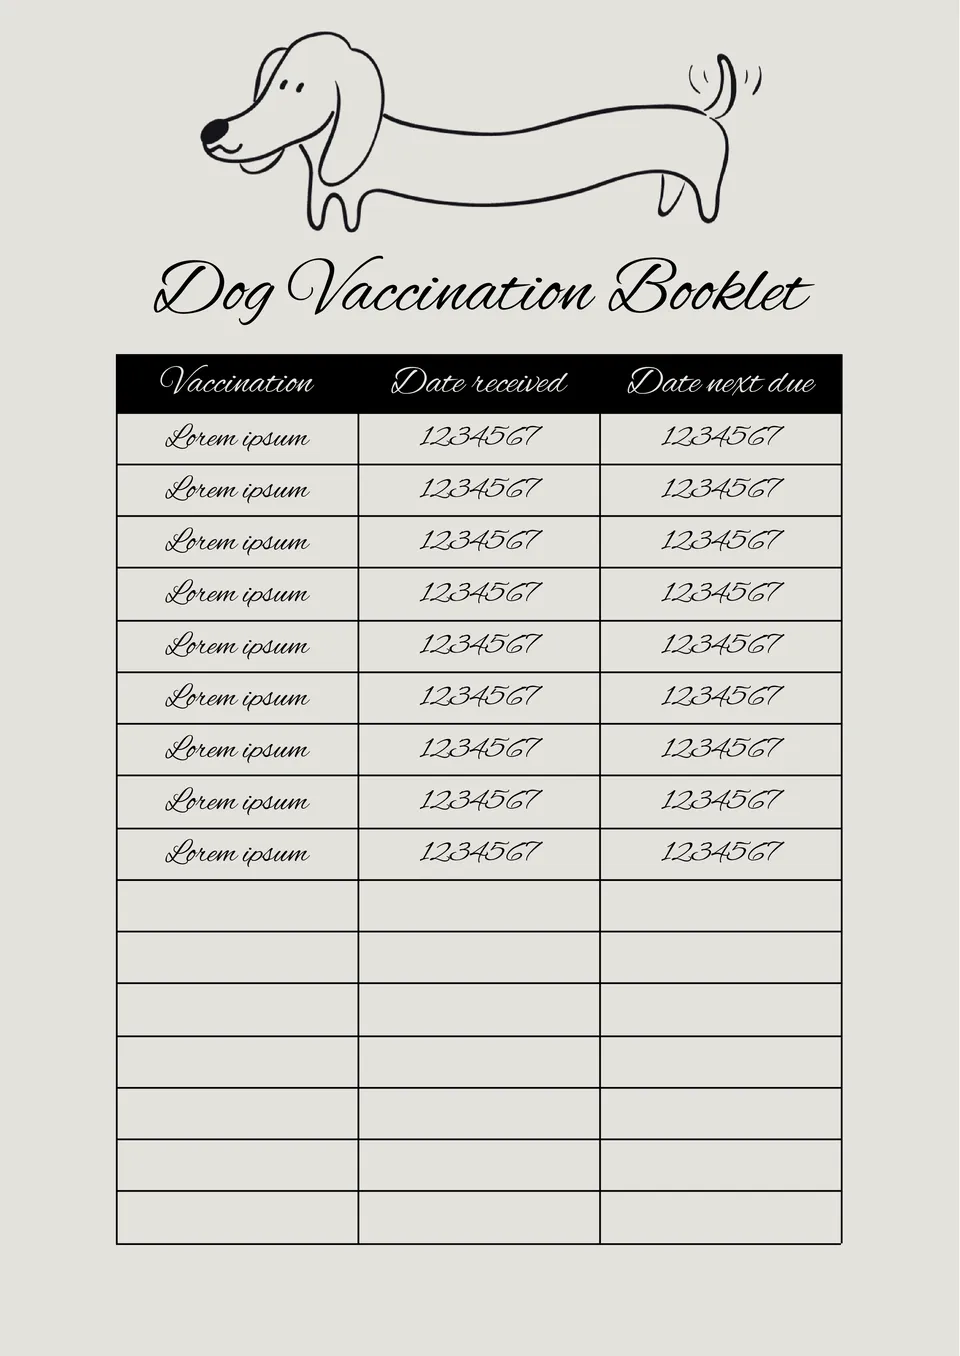 Dog Vaccination Booklet Template